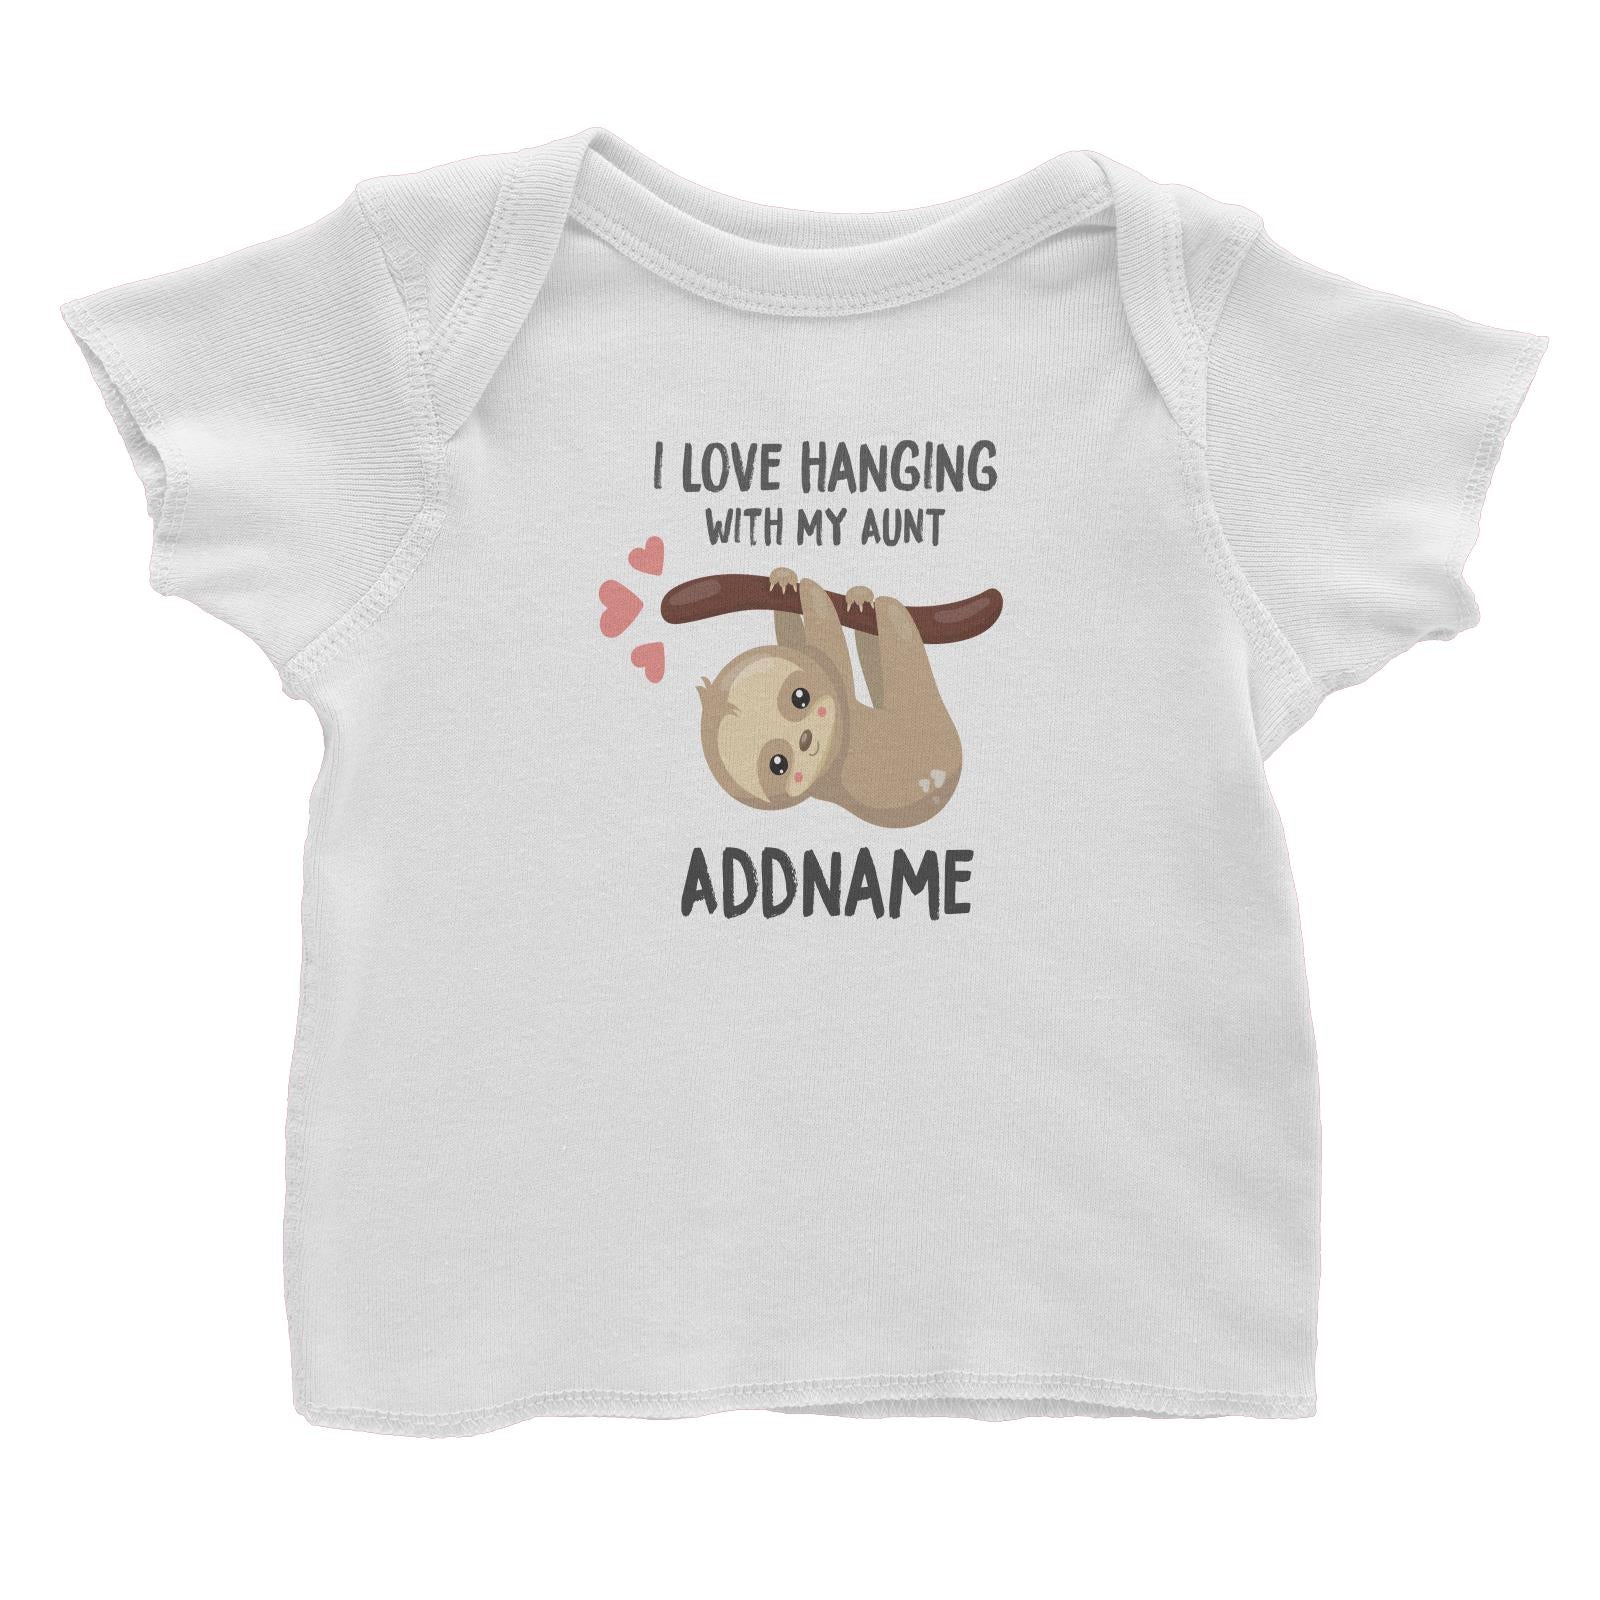 Cute Sloth I Love Hanging With My Aunt Addname Baby T-Shirt